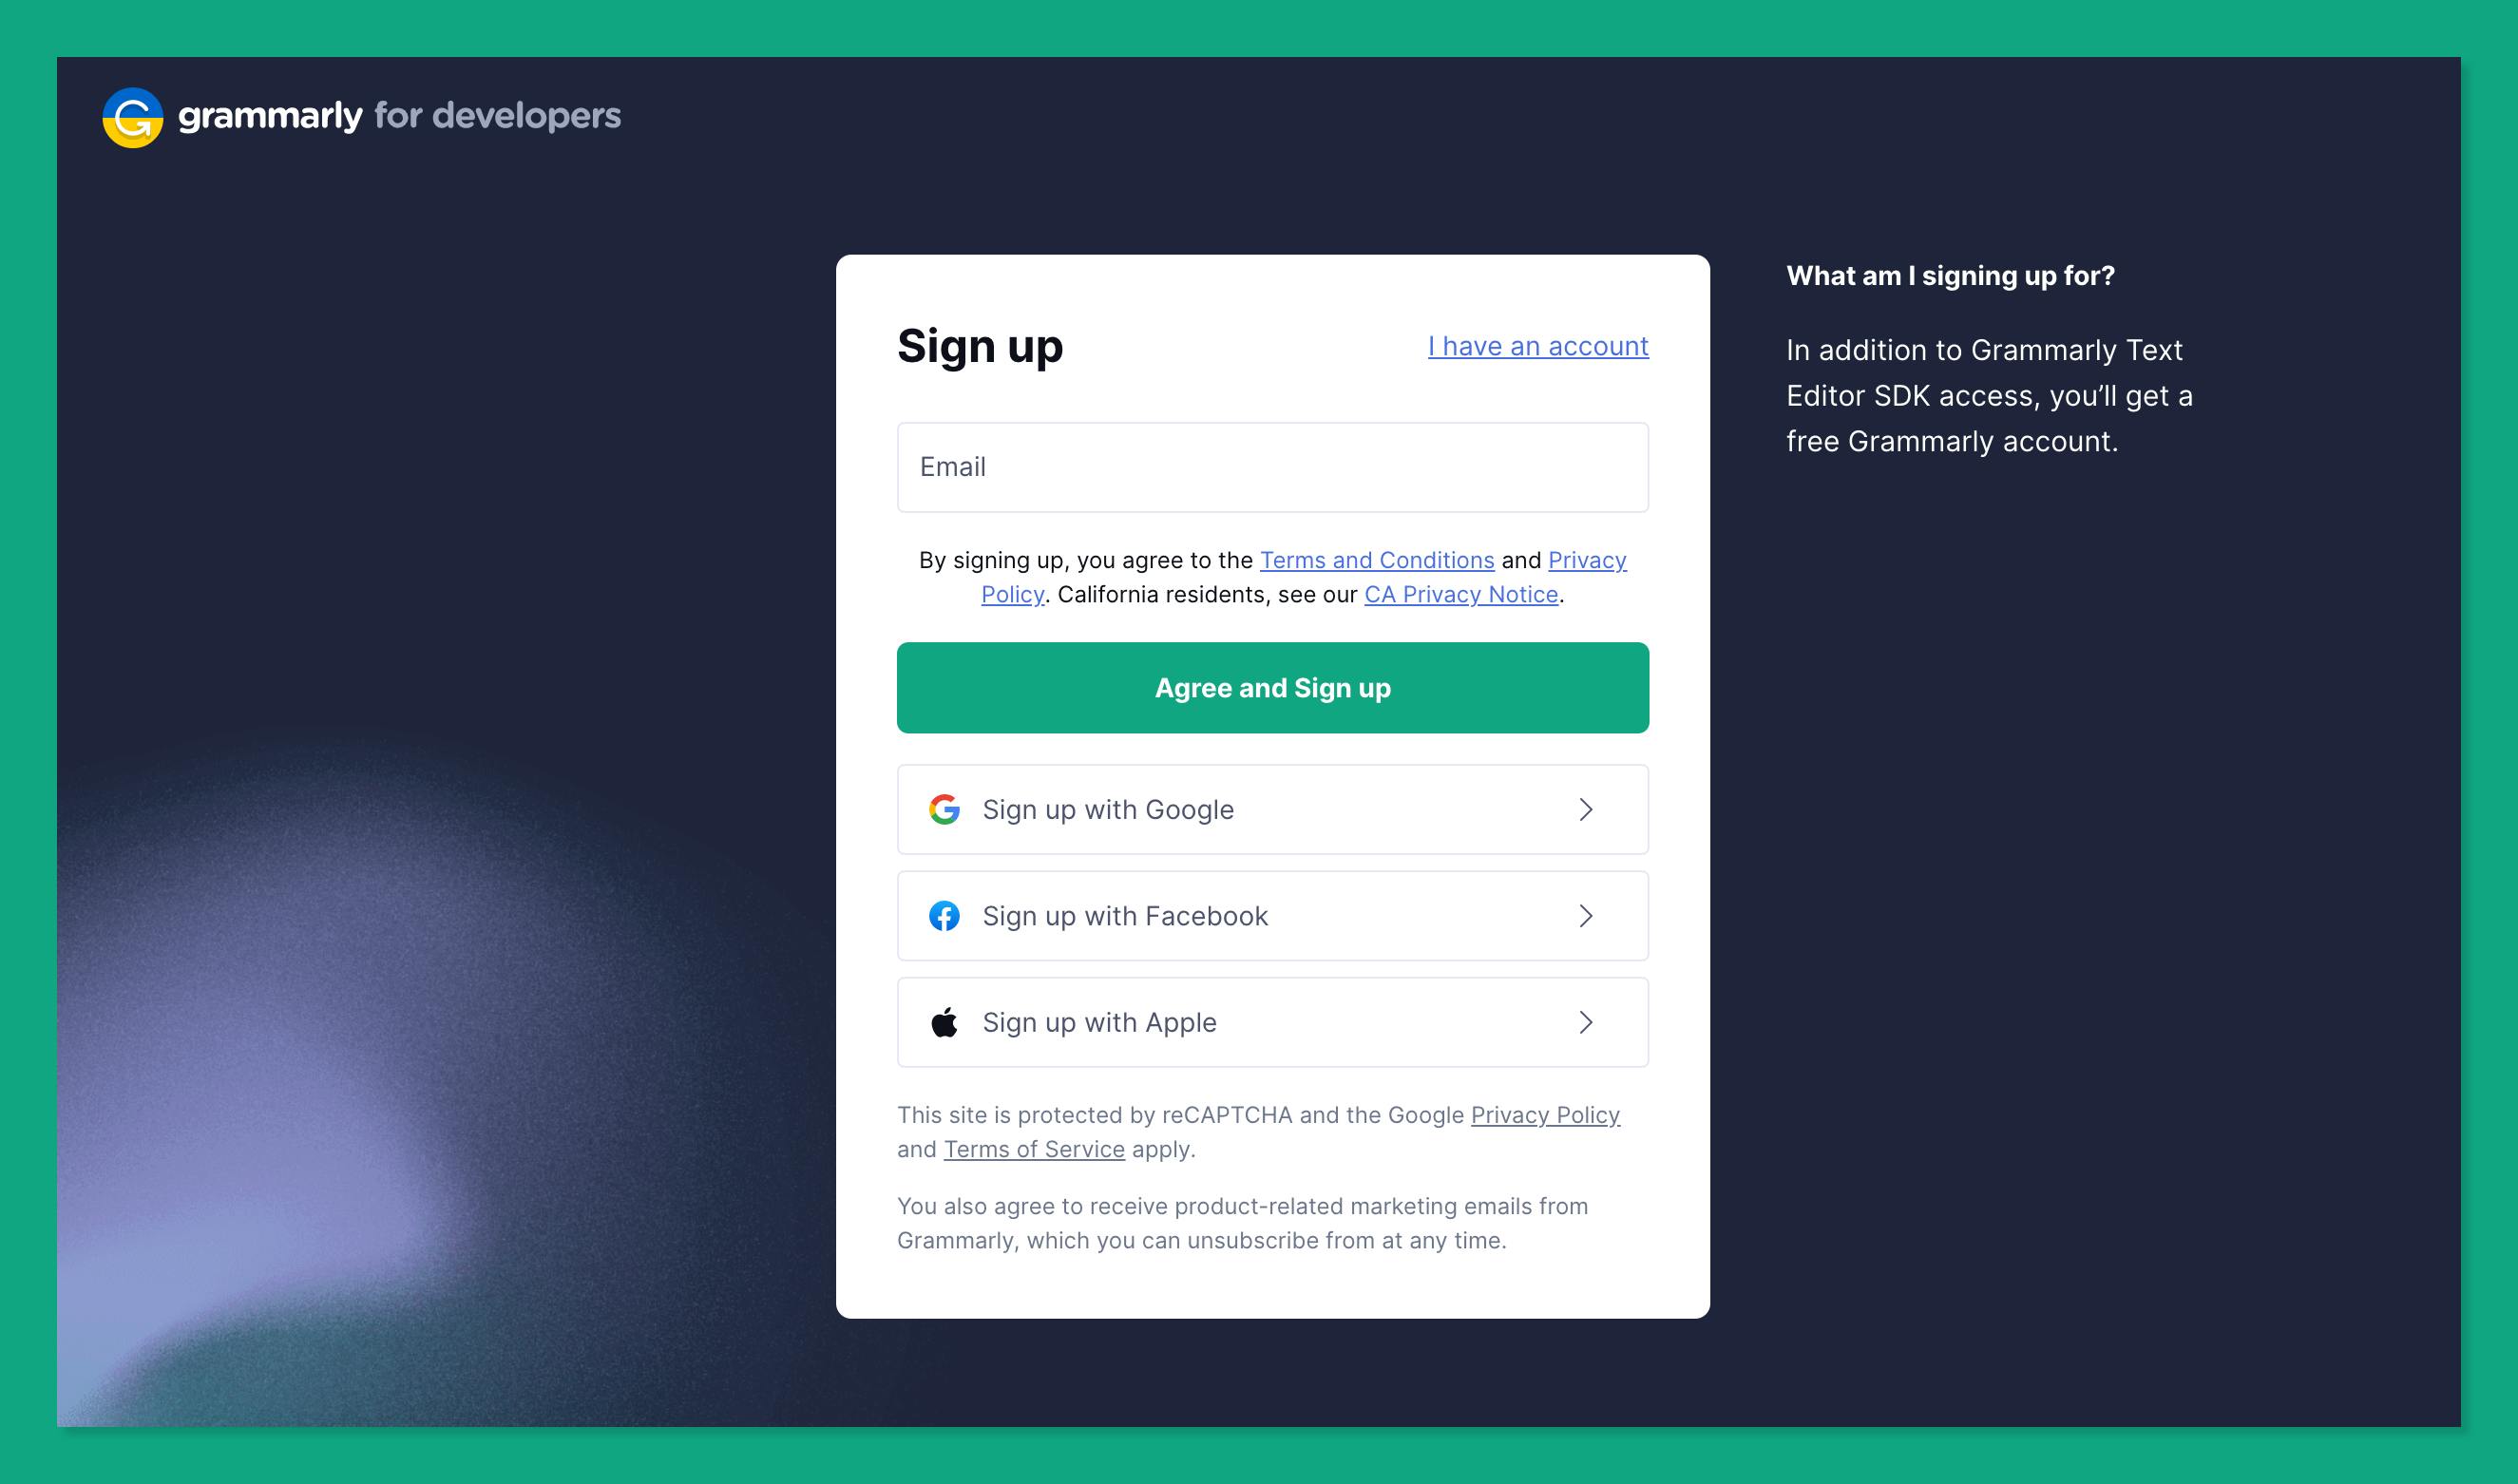 signing up on Grammarly; In addition to Grammarly Text Editor SDK access, you’ll get a free Grammarly account.